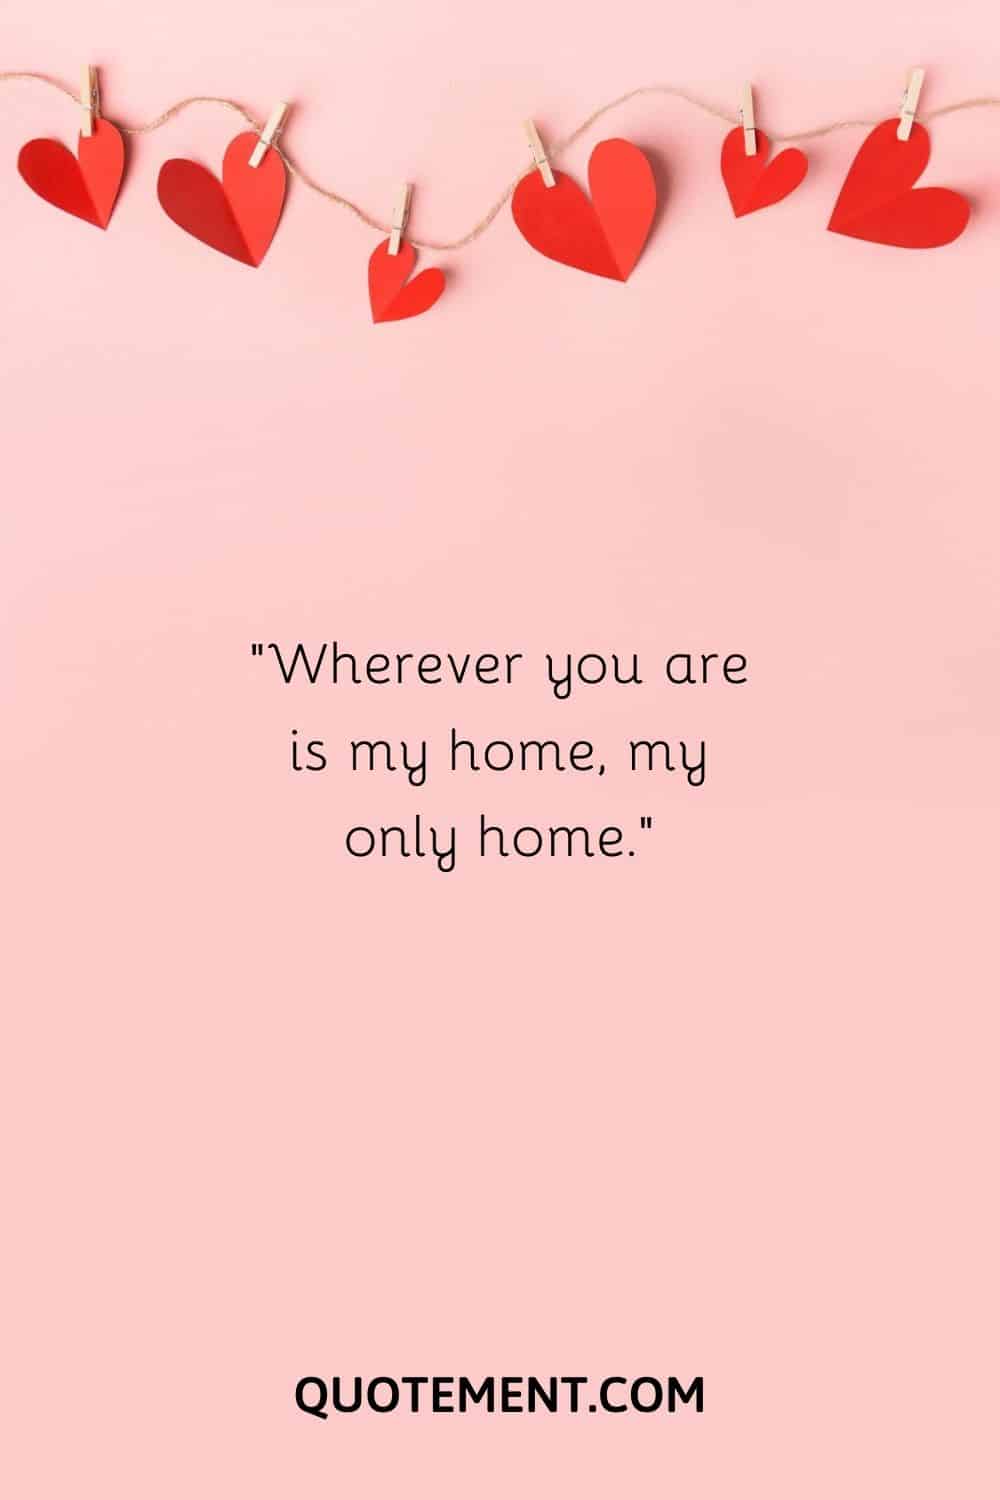 Wherever you are is my home, my only home